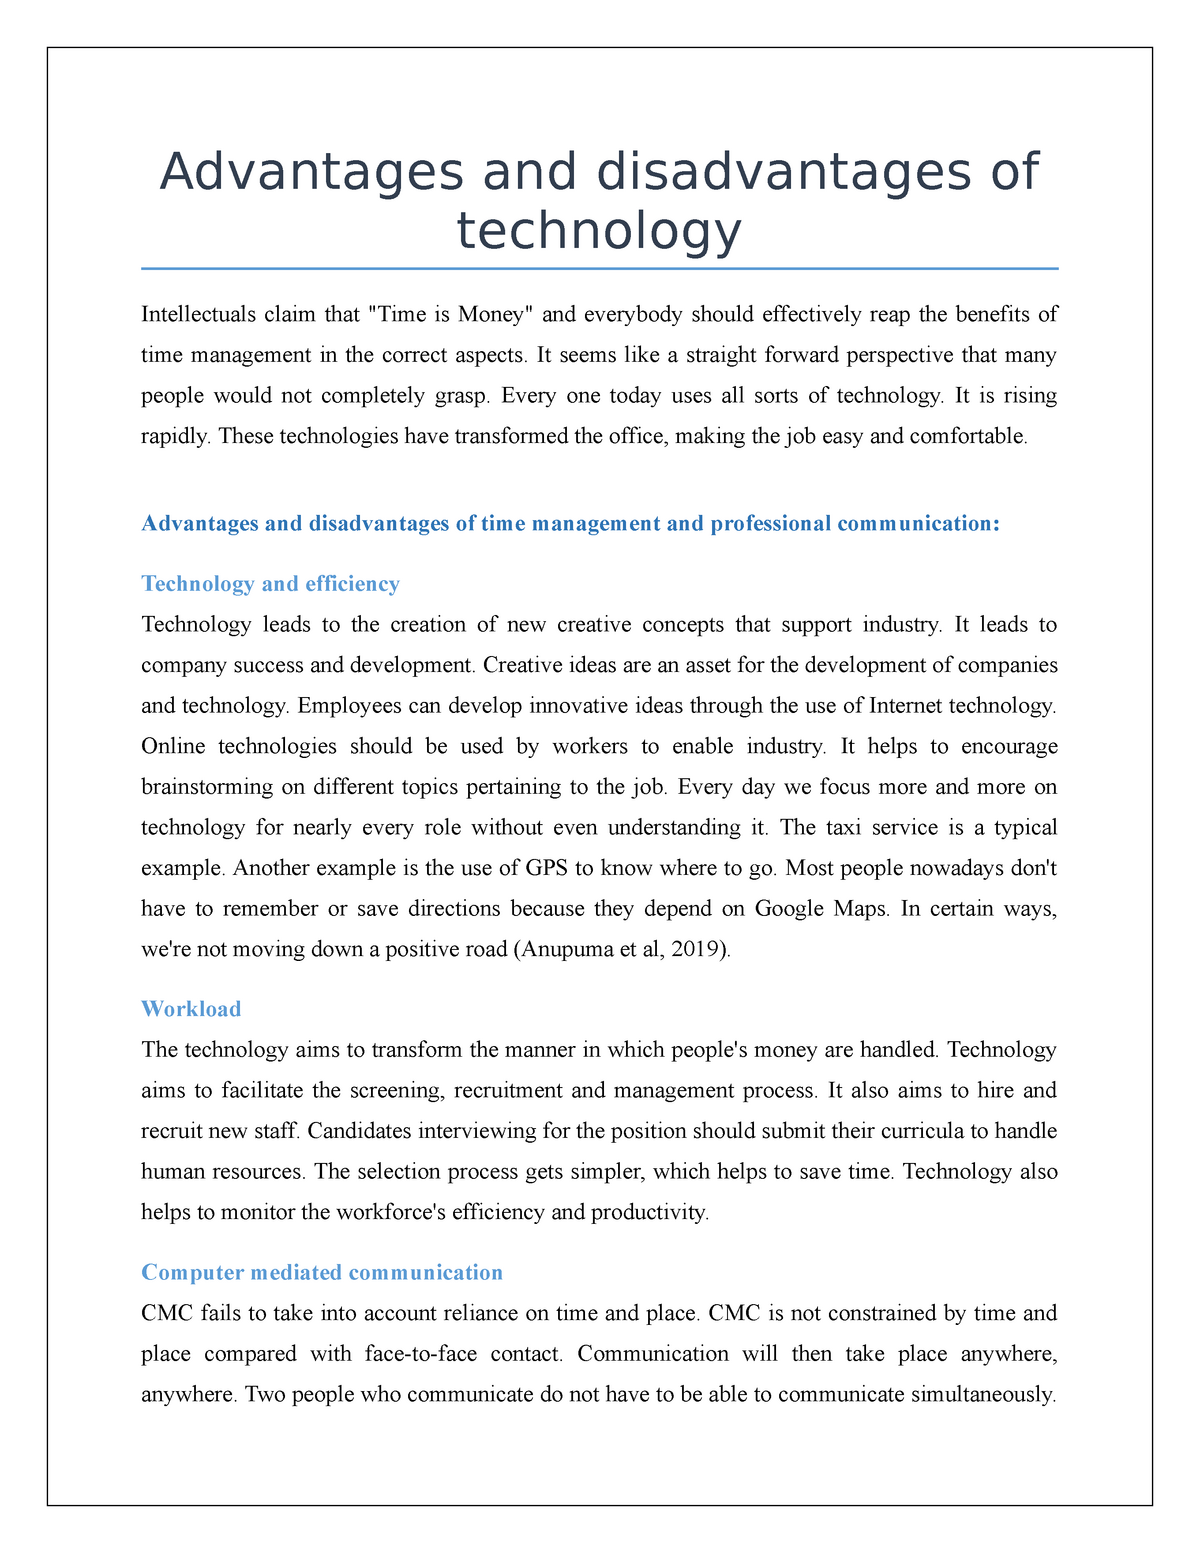 advantages and disadvantages of technology essay brainly